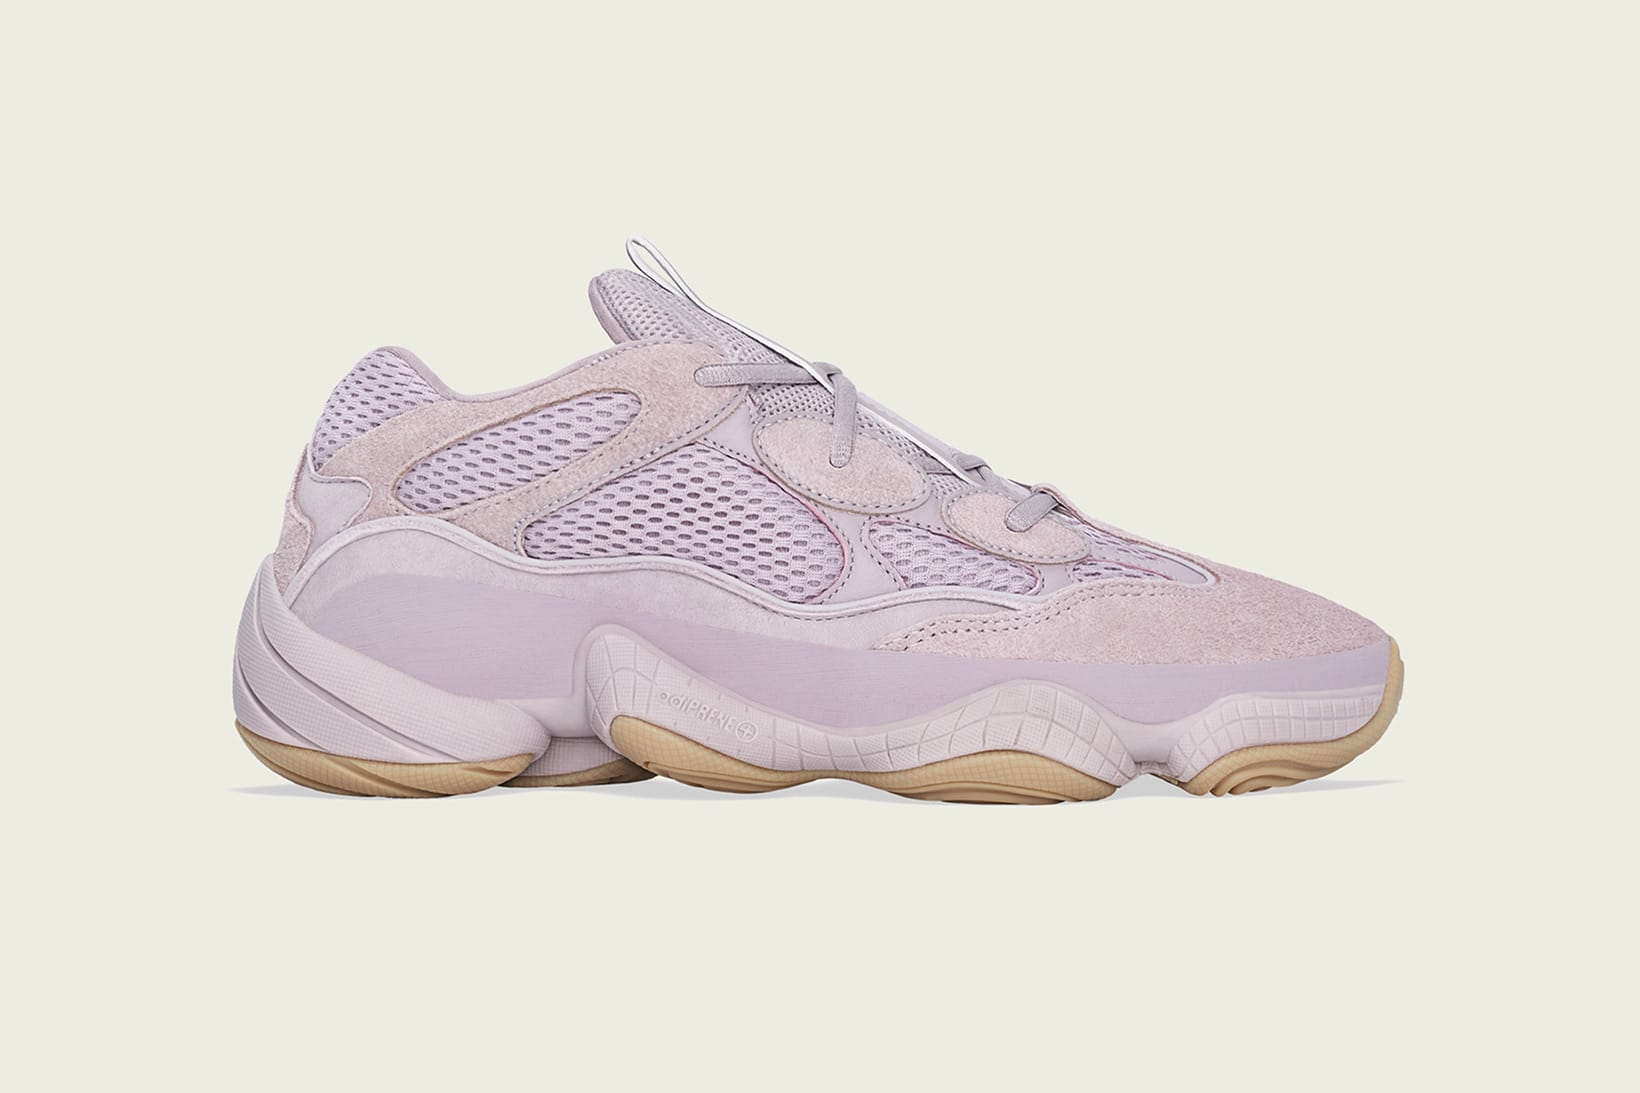 when did yeezy 500 come out